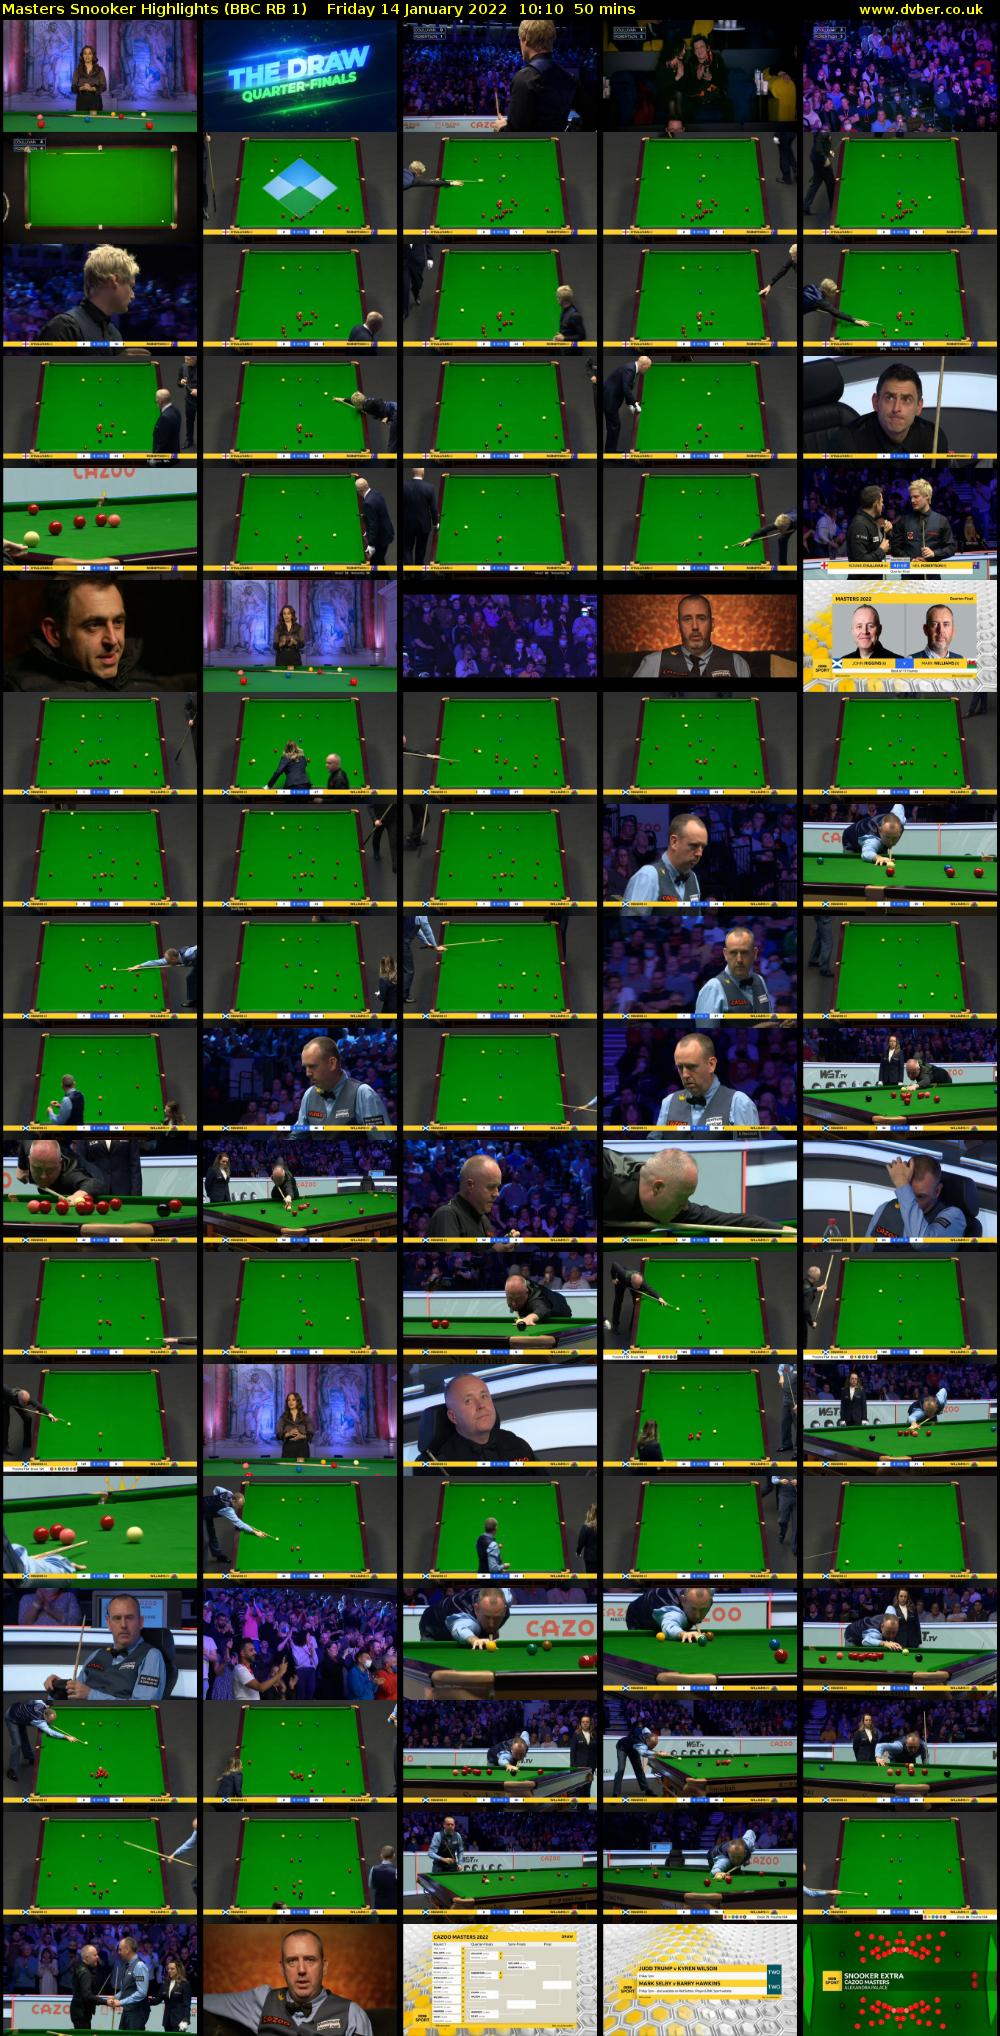 Masters Snooker Highlights (BBC RB 1) Friday 14 January 2022 10:10 - 11:00